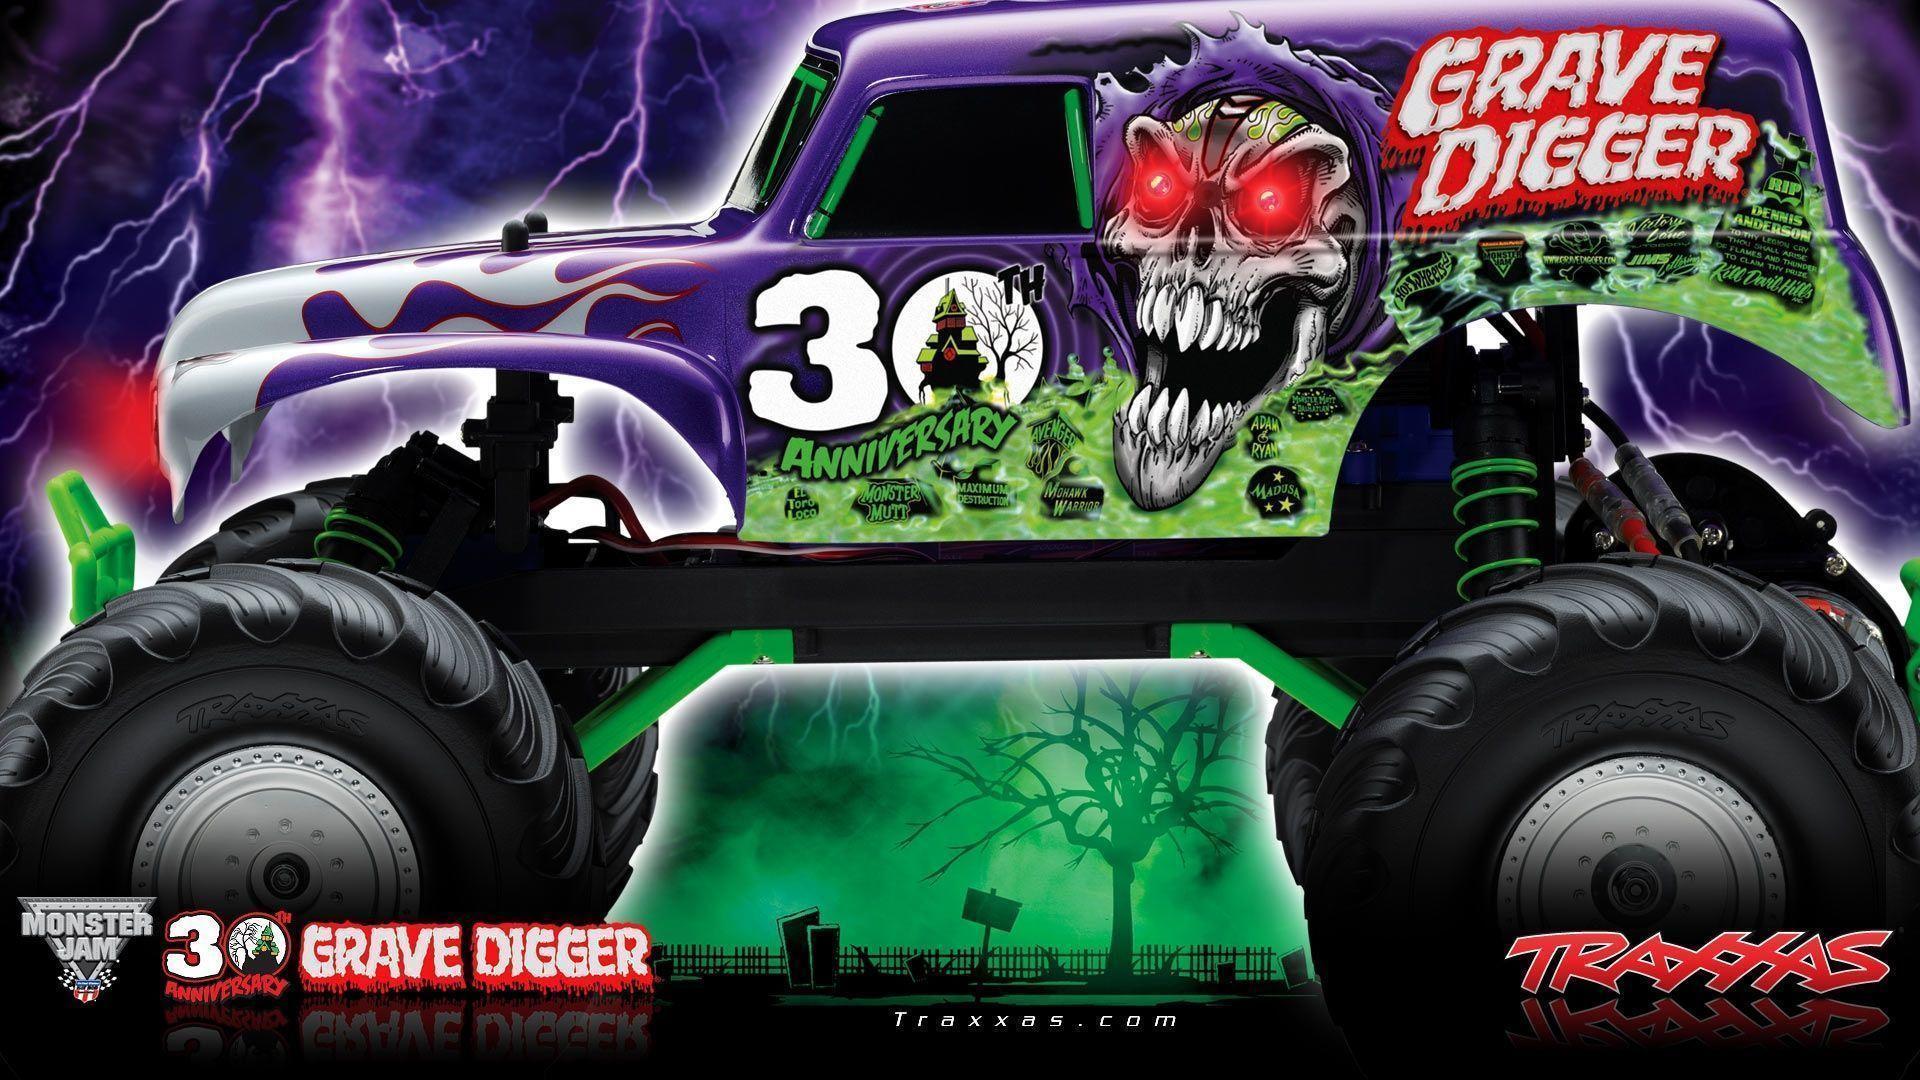 Vehicles For > Grave Digger Monster Truck 30th Anniversary